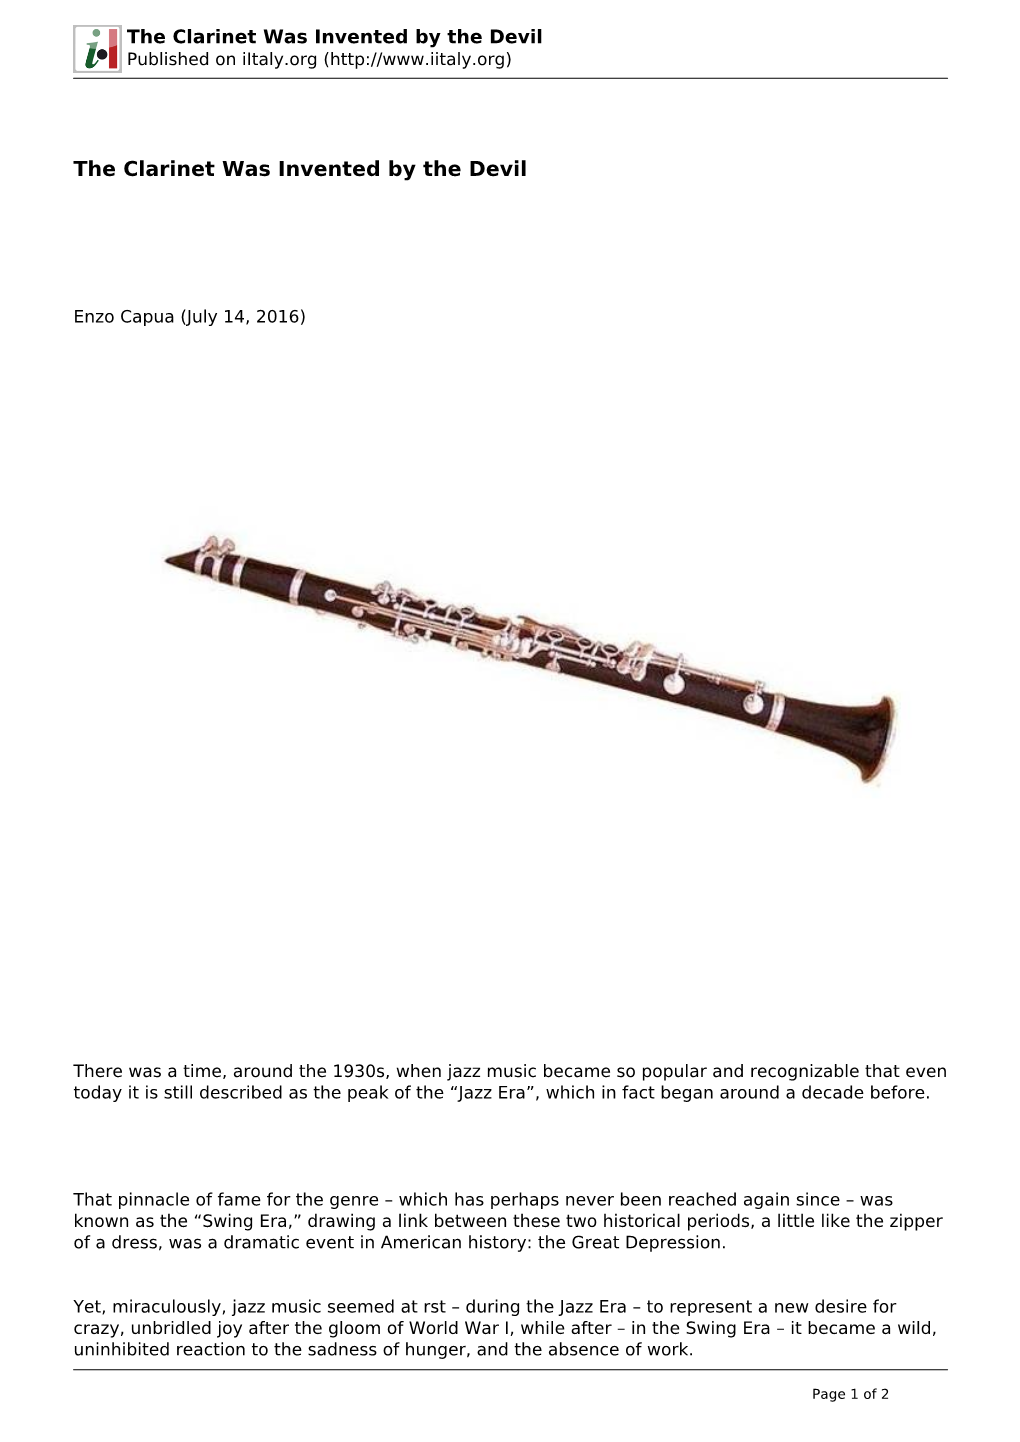 The Clarinet Was Invented by the Devil Published on Iitaly.Org (